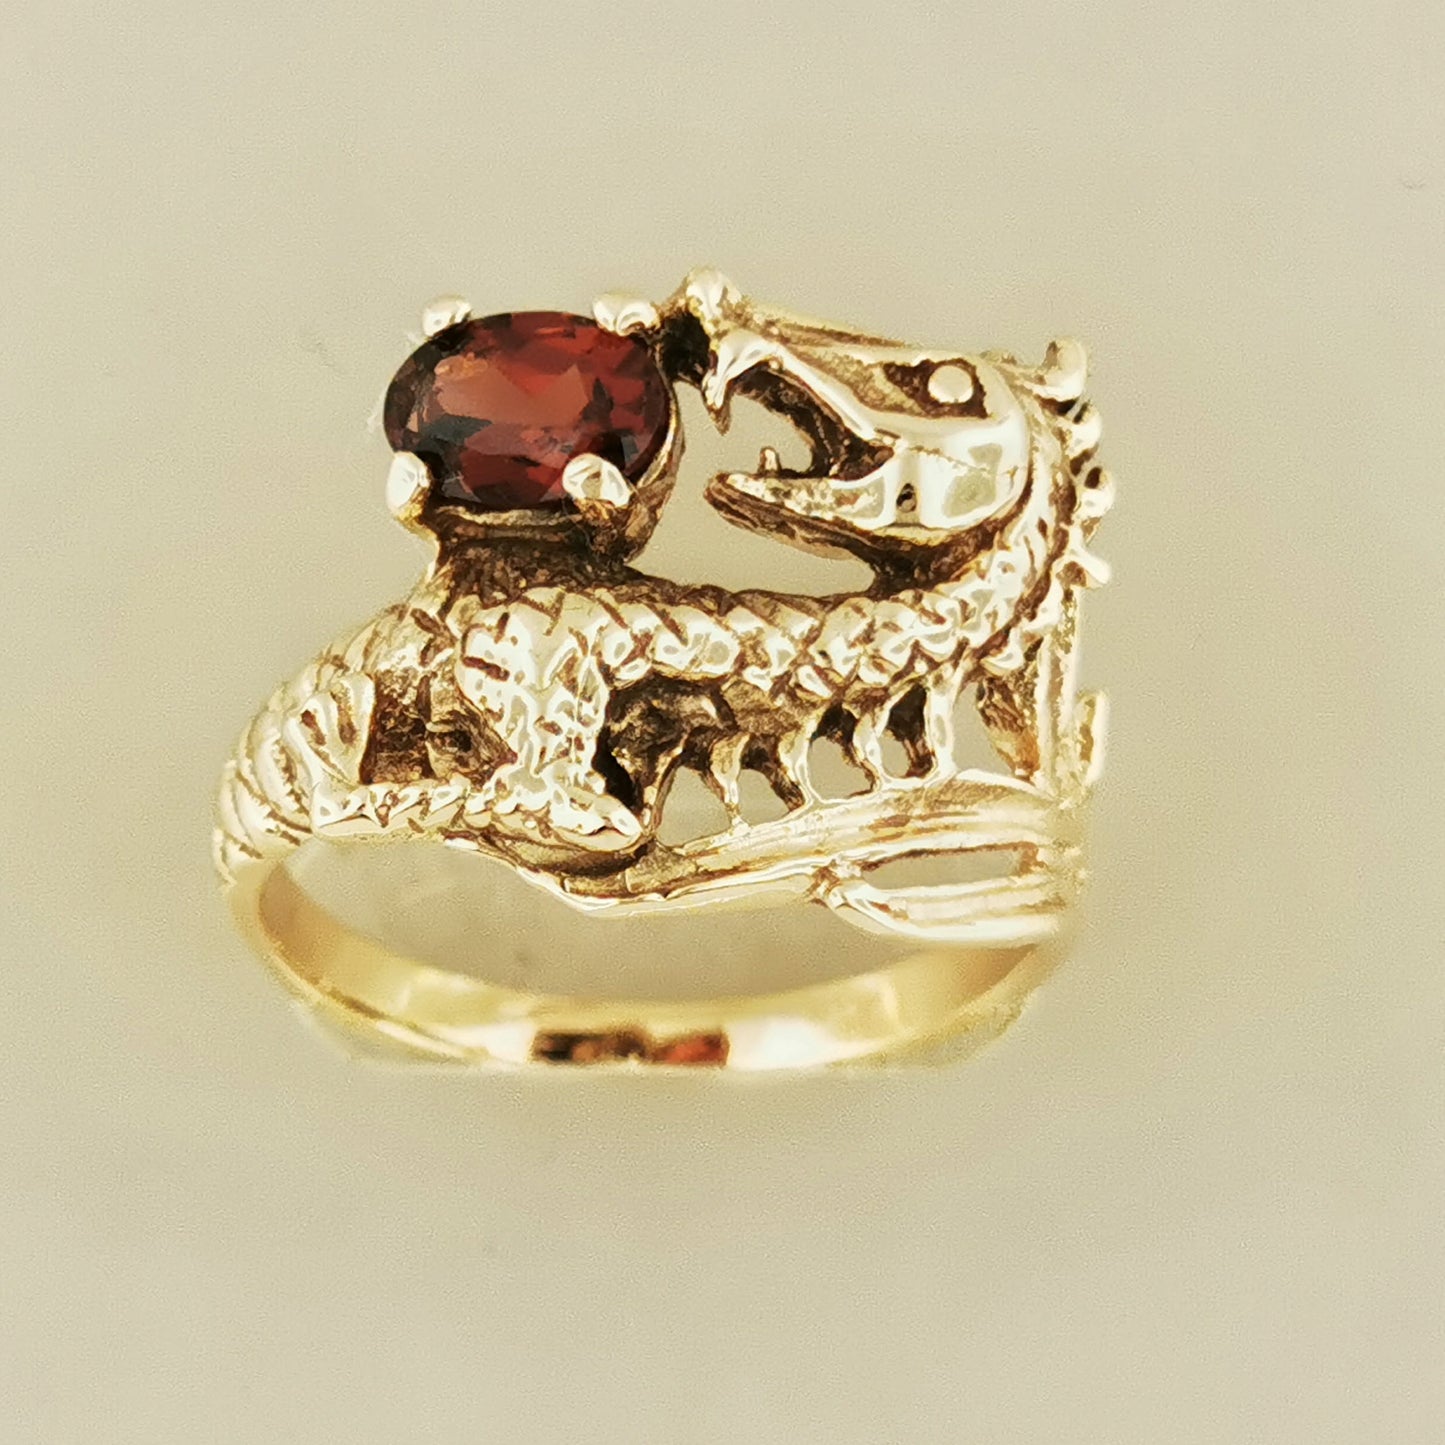 Dragon Ring with Oval Gemstone in Antique Bronze, Birthstone Dragon Ring, Dragon Ring for Him and Her, Bronze Dragon Jewellery, Unisex Dragon Ring, Gemstone Dragon Ring, Vintage Dragon Ring, Dragon Lover Jewelry, Bronze Dragon Ring